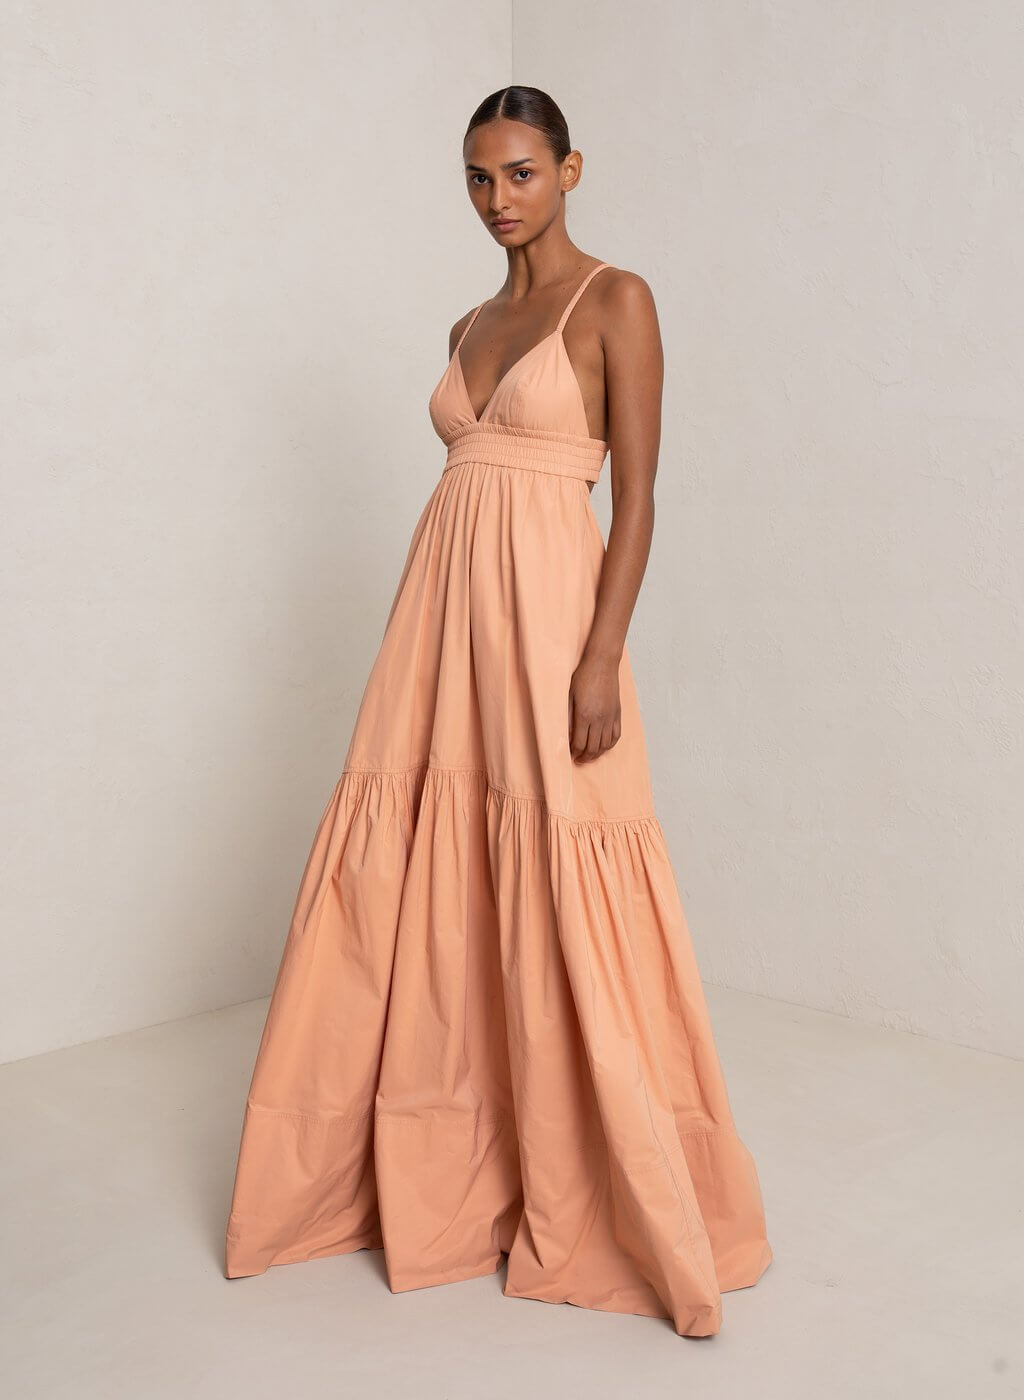 A.L.C Rosanna Maxi Dress in Dusty Coral from The New Trend